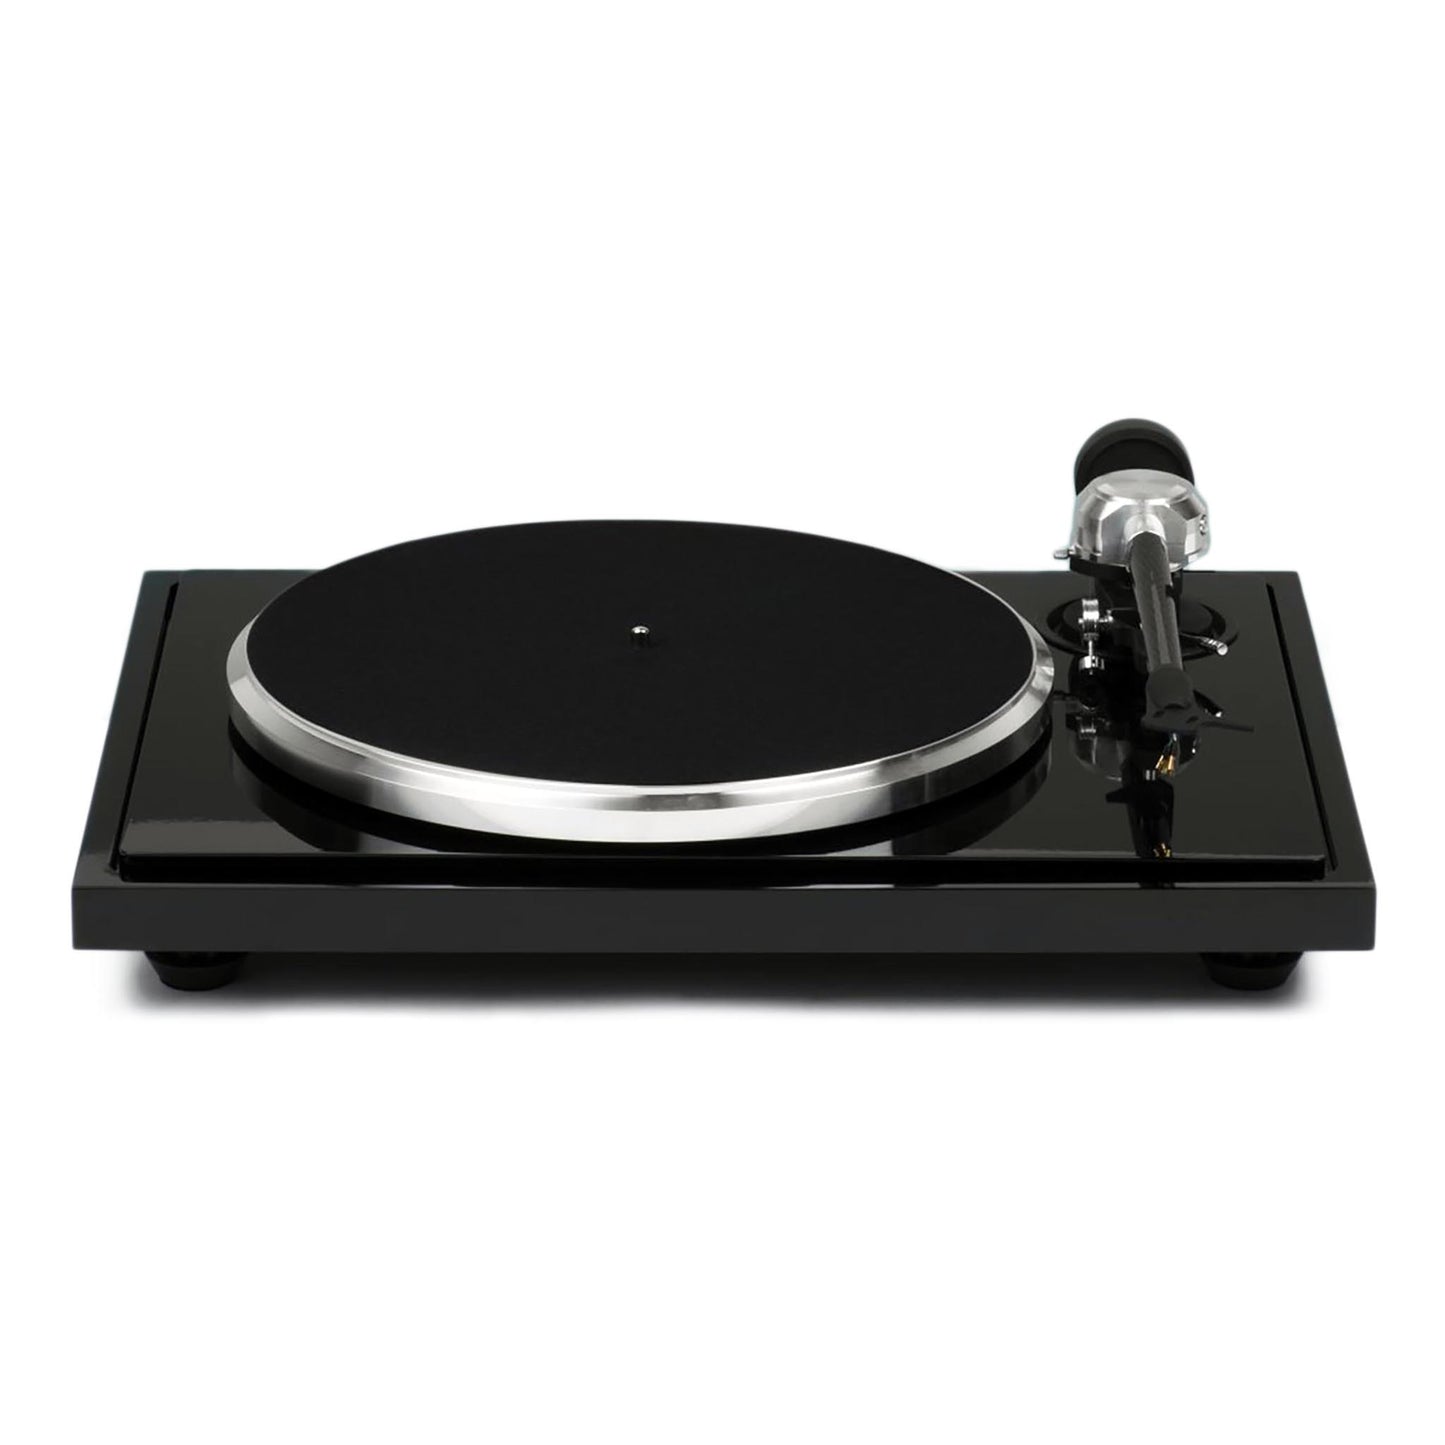 EAT B-Sharp Turntable with 9" B-Note Tone Arm, Dust Cover, and Ortofon 2M Blue Cartridge